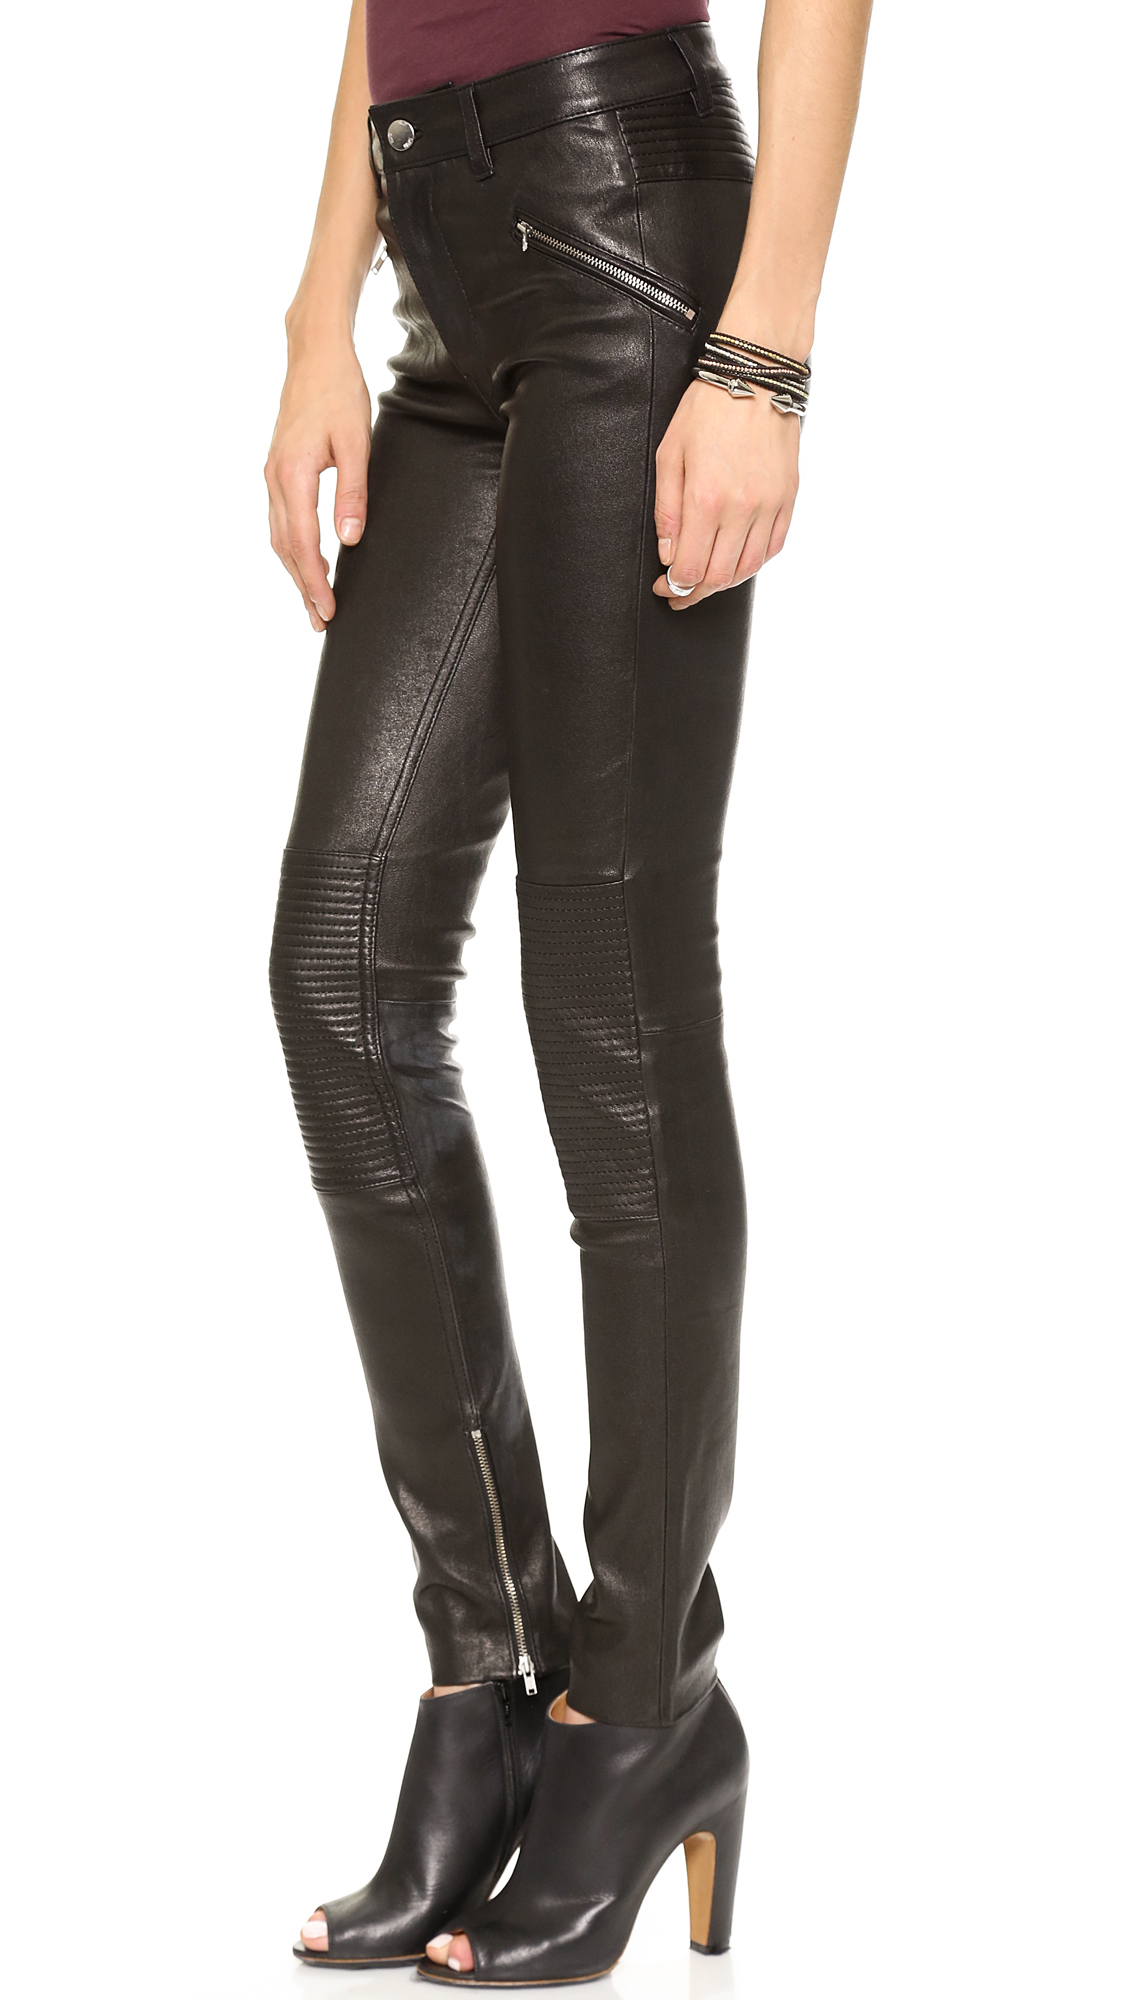 Lyst - BLK DNM Bikerstyle Leather Trousers in Black